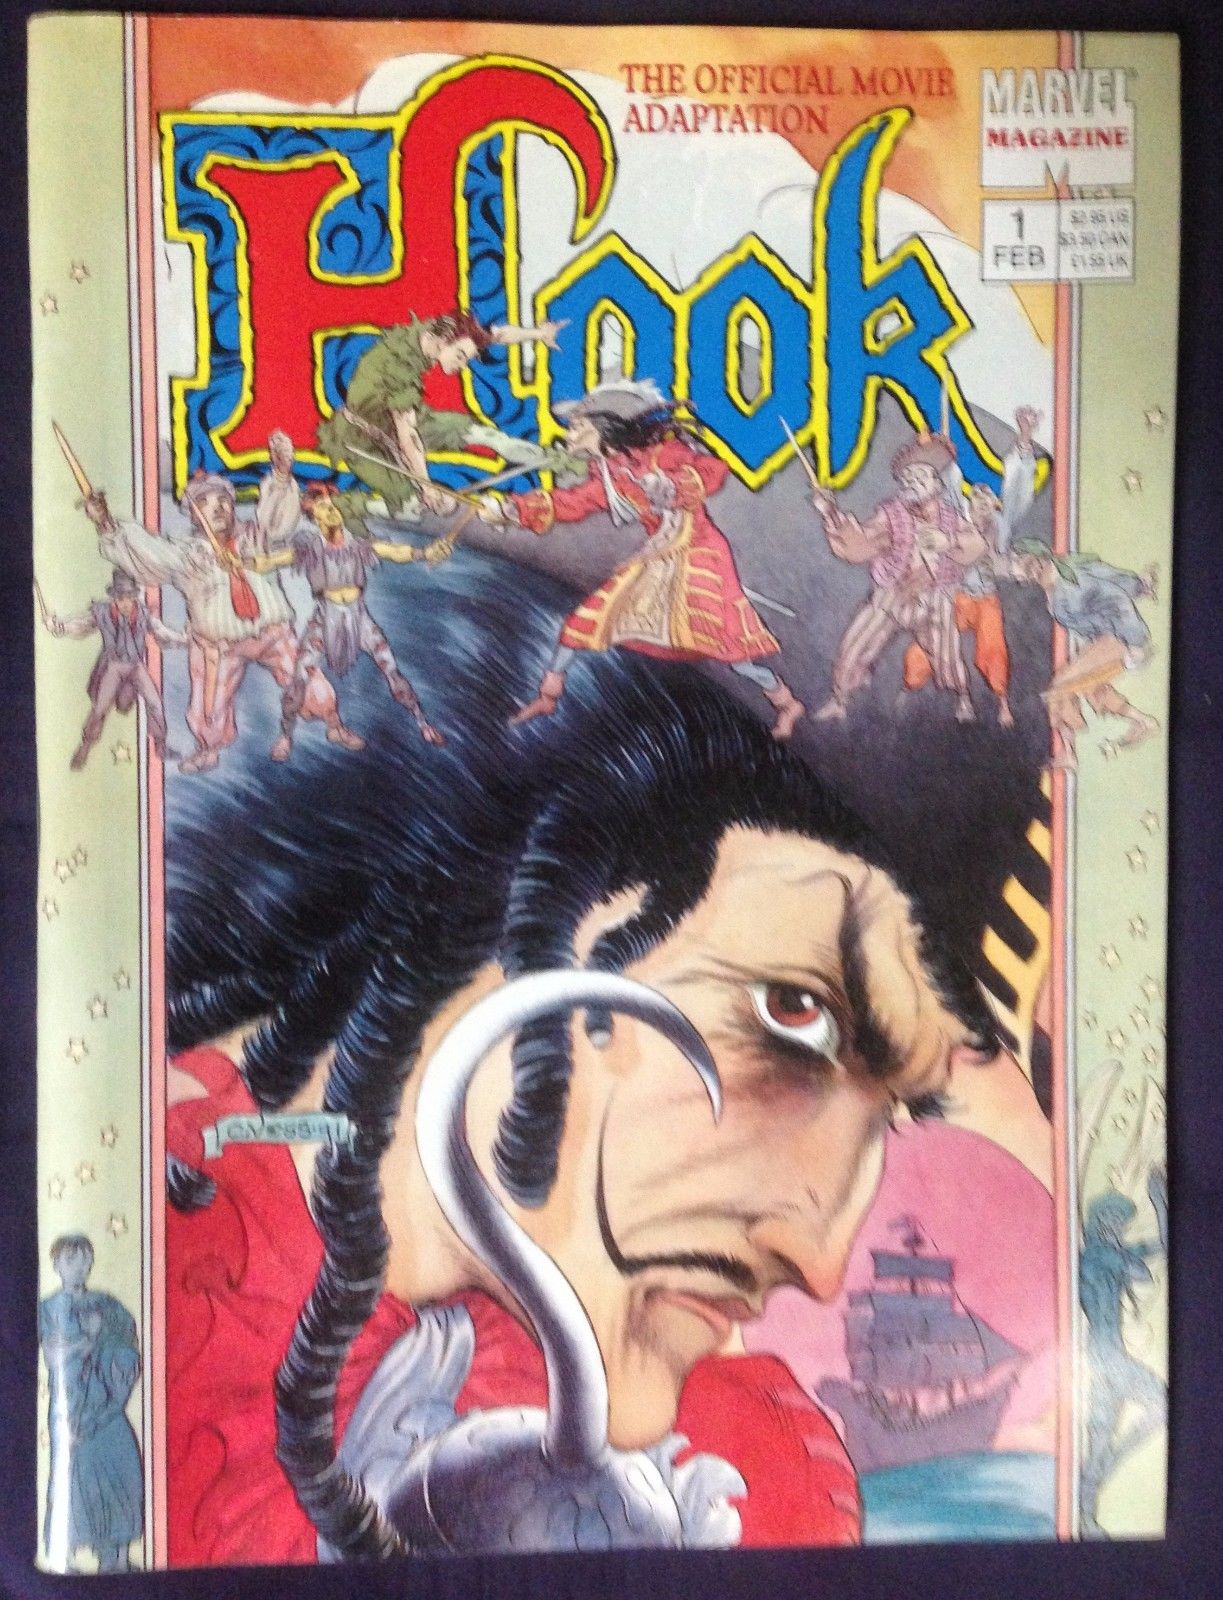 Hook (1991) 1 2 3 4 complete set + Hook The Official Movie Adaptation TPB C  Vess